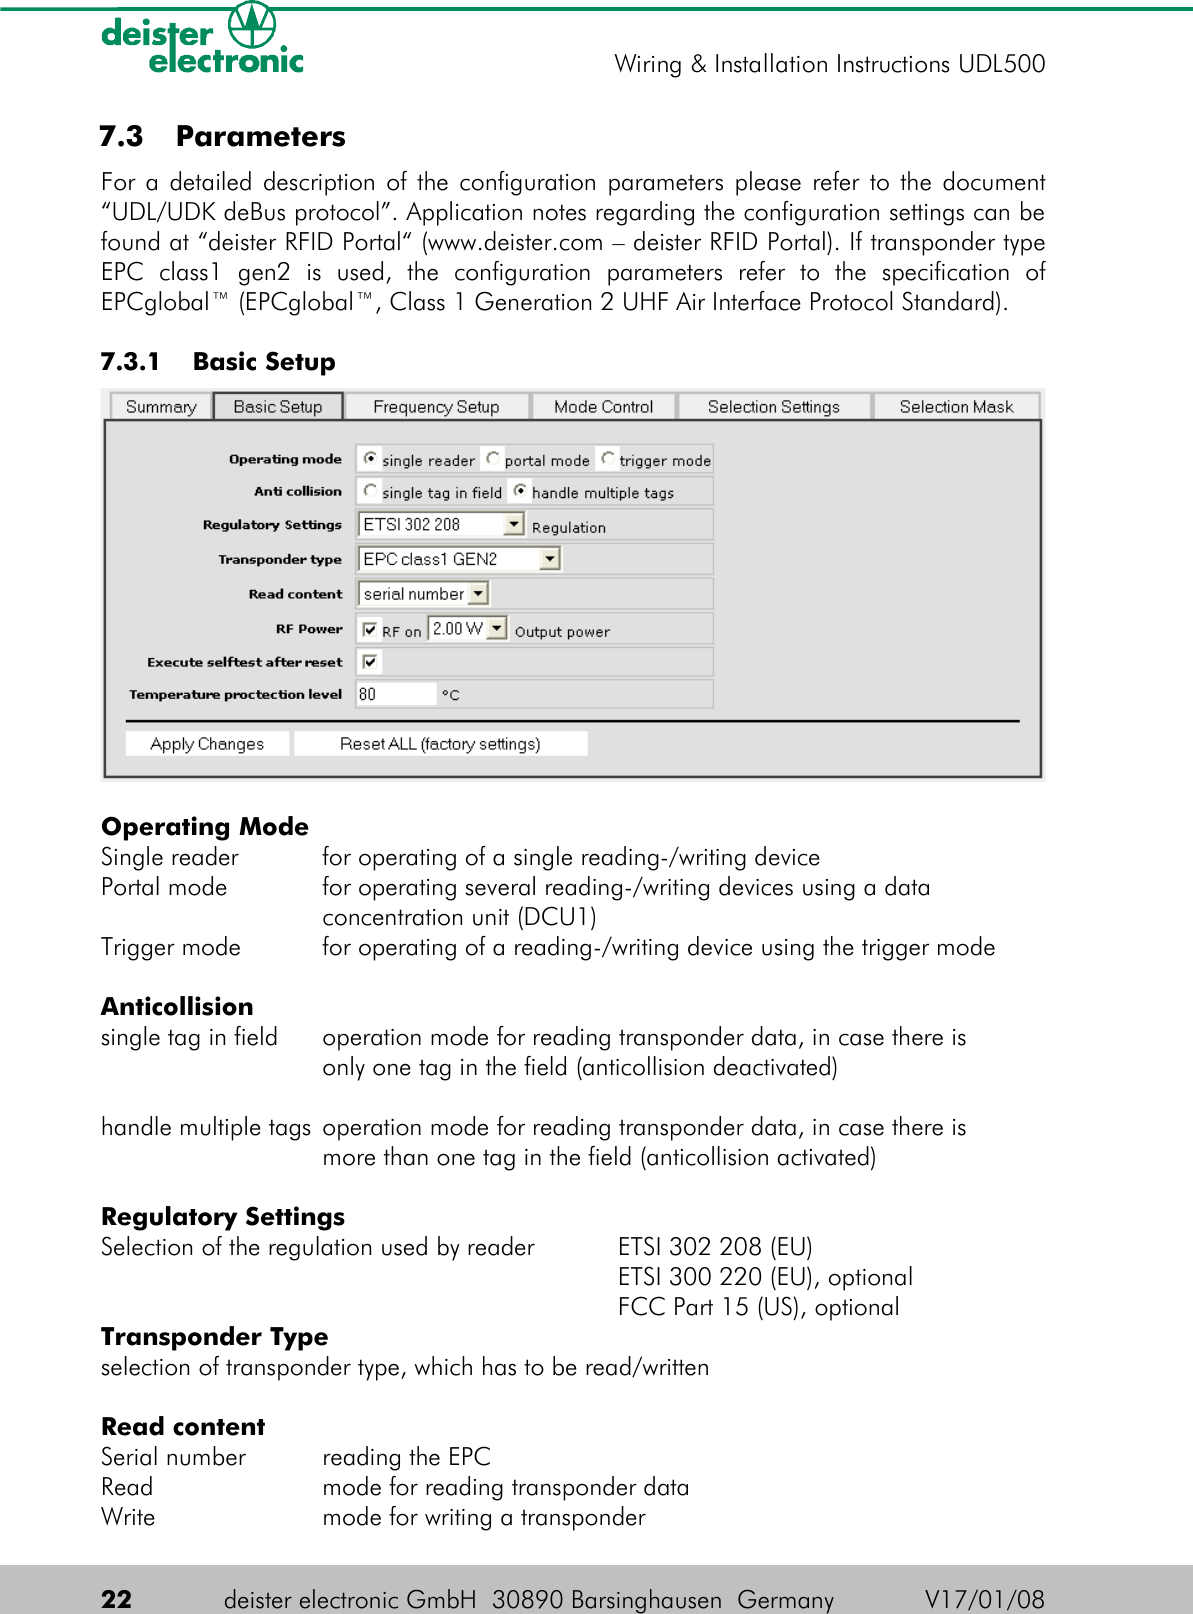  7.3  ParametersFor a detailed description of the configuration parameters please refer to the document “UDL/UDK deBus protocol”. Application notes regarding the configuration settings can be found at “deister RFID Portal“ (www.deister.com – deister RFID Portal). If transponder type EPC   class1   gen2   is   used,   the   configuration   parameters   refer   to   the   specification   of EPCglobal™ (EPCglobal™, Class 1 Generation 2 UHF Air Interface Protocol Standard). 7.3.1  Basic SetupOperating ModeSingle reader for operating of a single reading-/writing devicePortal mode for operating several reading-/writing devices using a dataconcentration unit (DCU1)Trigger mode for operating of a reading-/writing device using the trigger modeAnticollisionsingle tag in field operation mode for reading transponder data, in case there isonly one tag in the field (anticollision deactivated)handle multiple tags operation mode for reading transponder data, in case there ismore than one tag in the field (anticollision activated)Regulatory SettingsSelection of the regulation used by reader ETSI 302 208 (EU)ETSI 300 220 (EU), optionalFCC Part 15 (US), optionalTransponder Typeselection of transponder type, which has to be read/writtenRead contentSerial number reading the EPCRead mode for reading transponder dataWrite mode for writing a transponder22 deister electronic GmbH  30890 Barsinghausen  Germany V17/01/08Wiring &amp; Installation Instructions UDL500